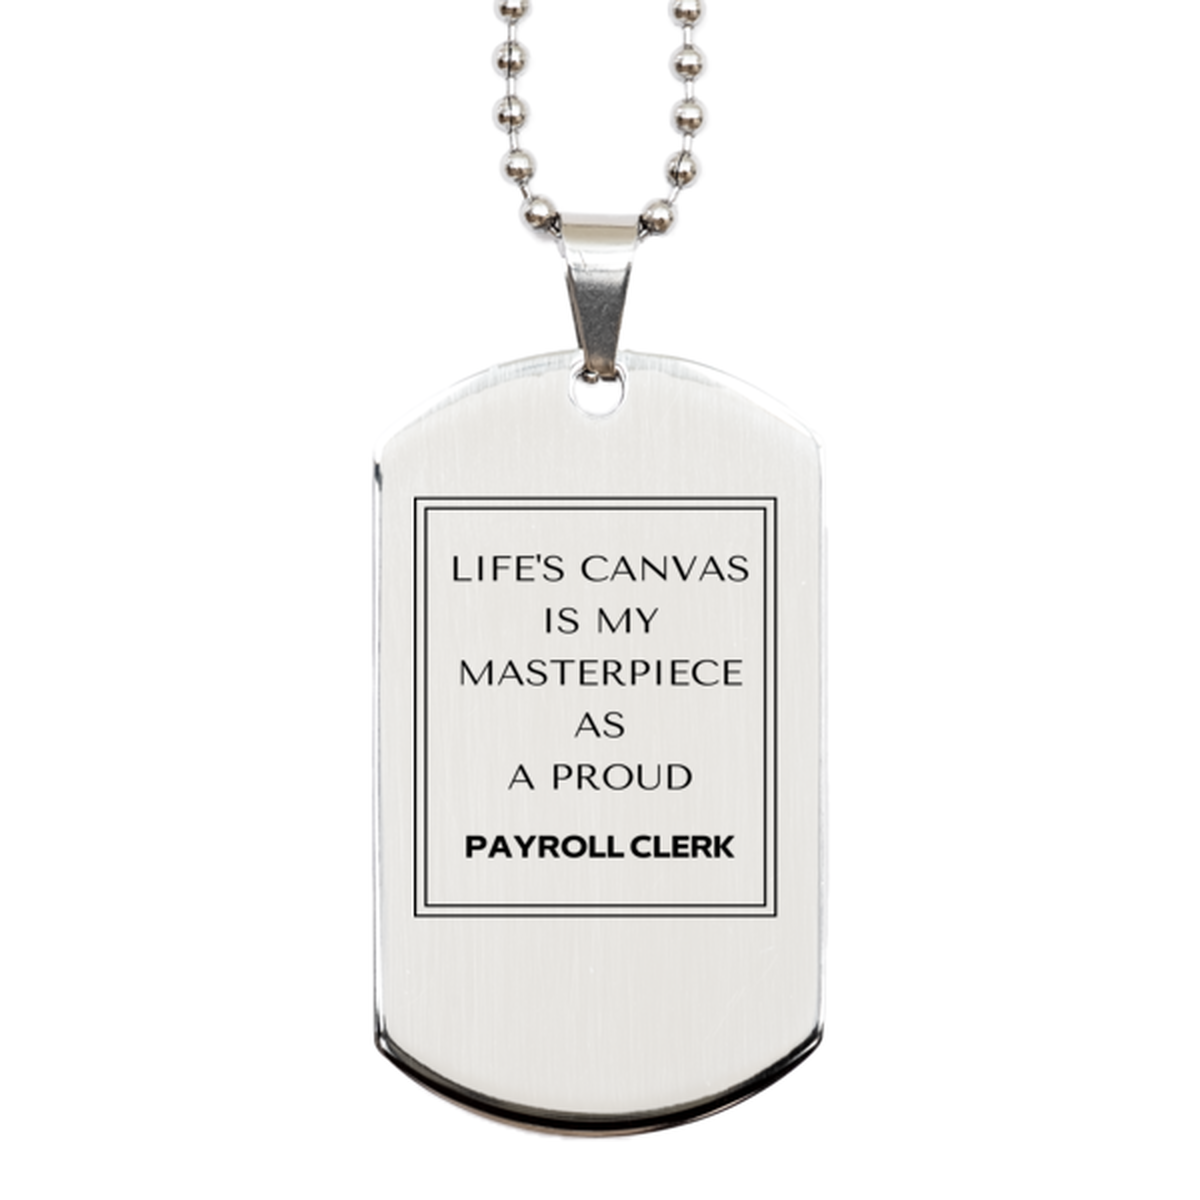 Proud Payroll Clerk Gifts, Life's canvas is my masterpiece, Epic Birthday Christmas Unique Silver Dog Tag For Payroll Clerk, Coworkers, Men, Women, Friends